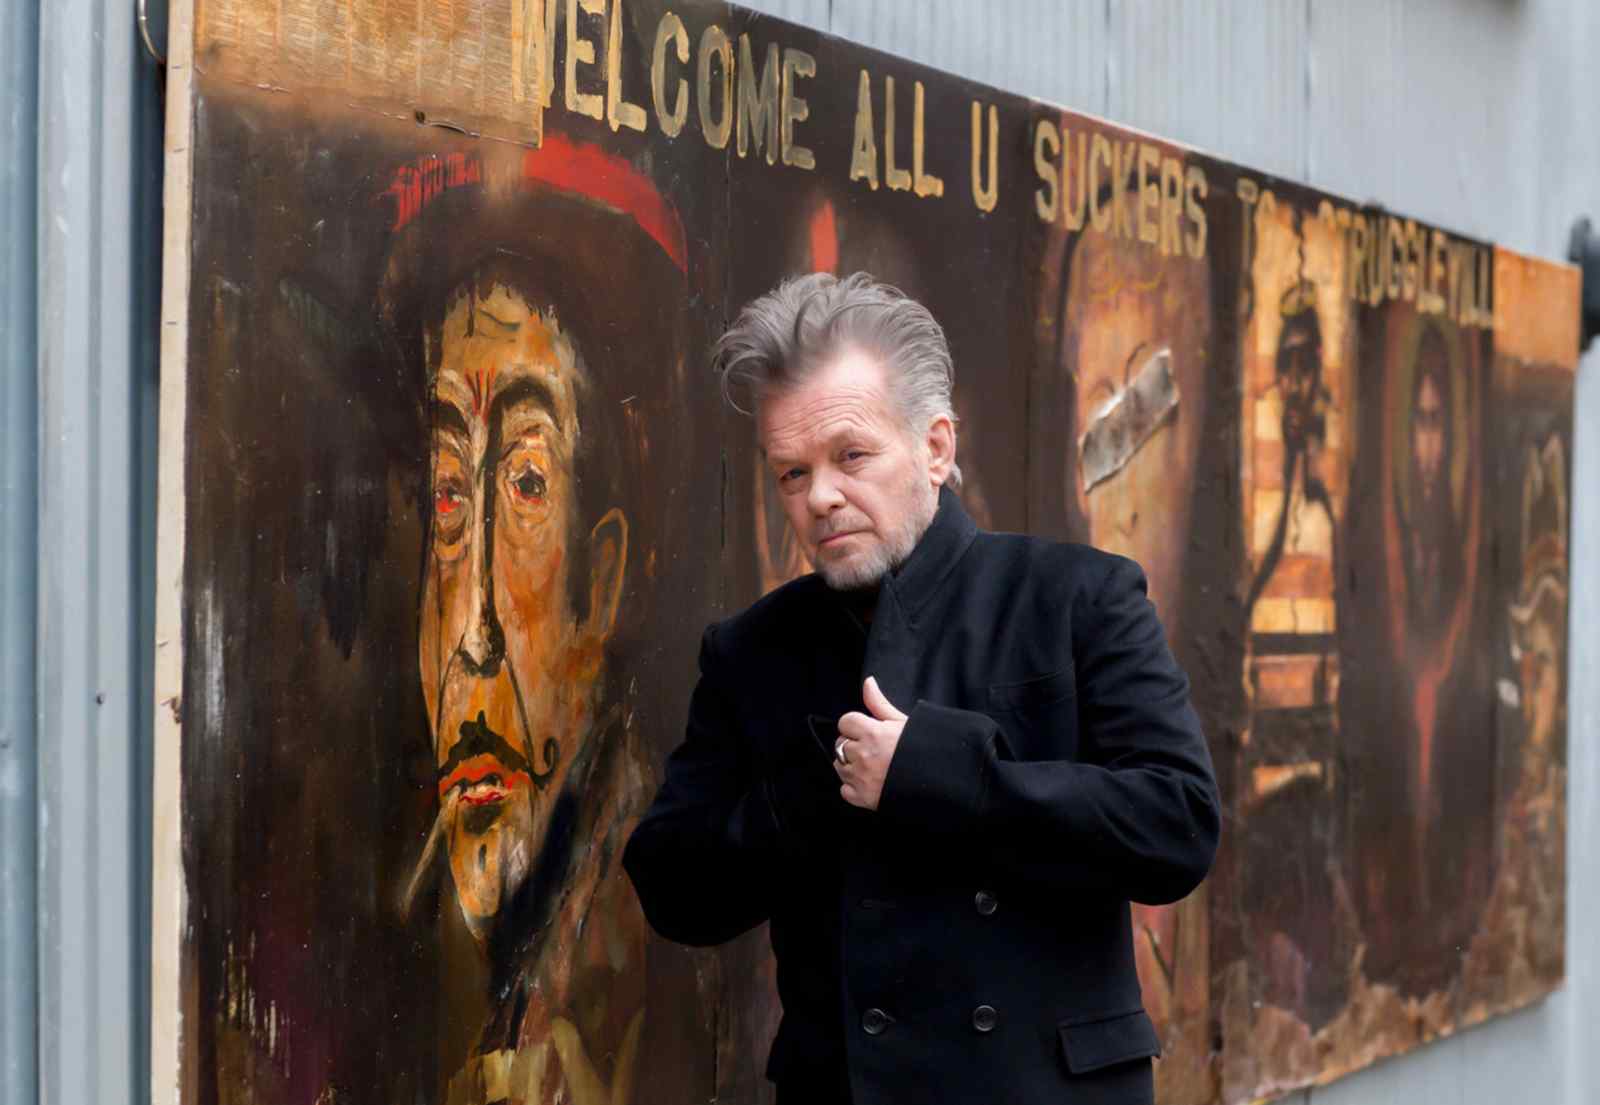 People Magazine: John Mellencamp Says He's Surrounded by 'Angels' After Surviving Heart Attack and Rock 'n' Roll Life